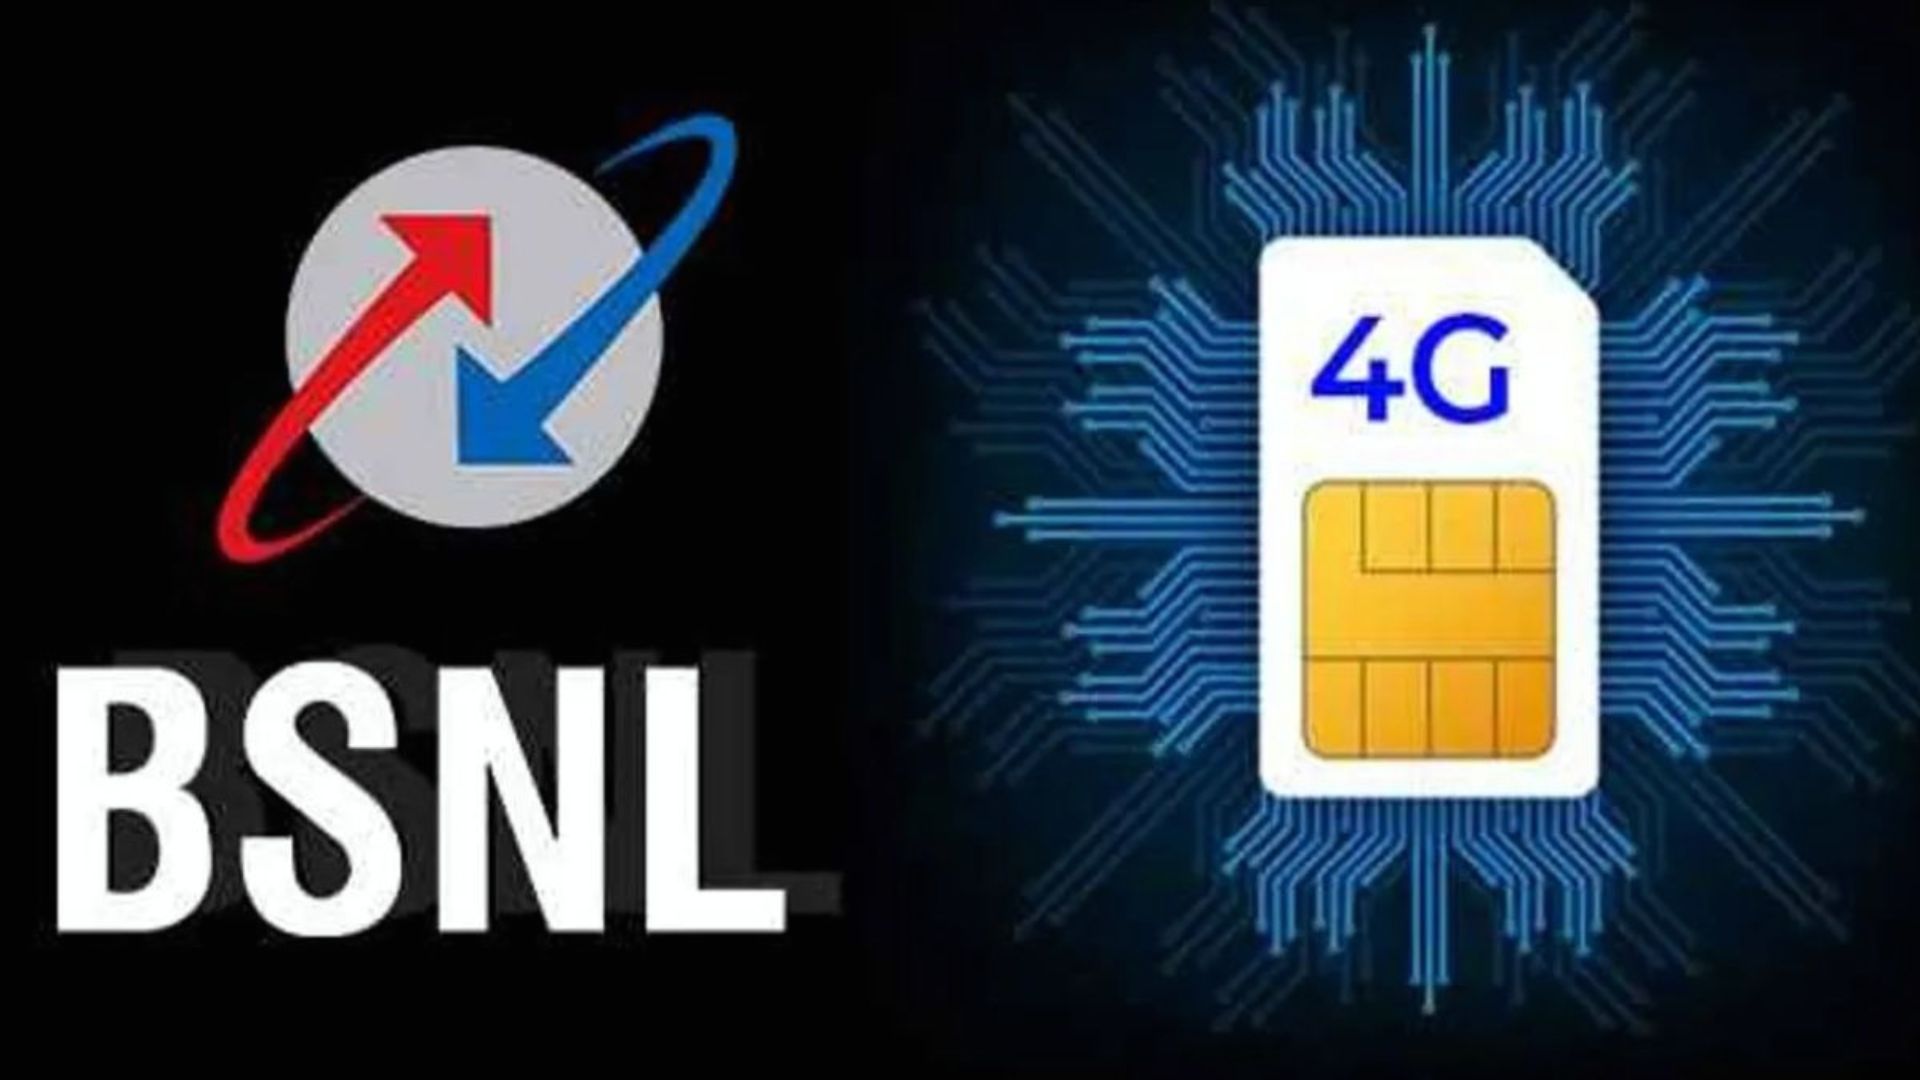 How To Get Free Data In BSNL - Data Codes & Offers 